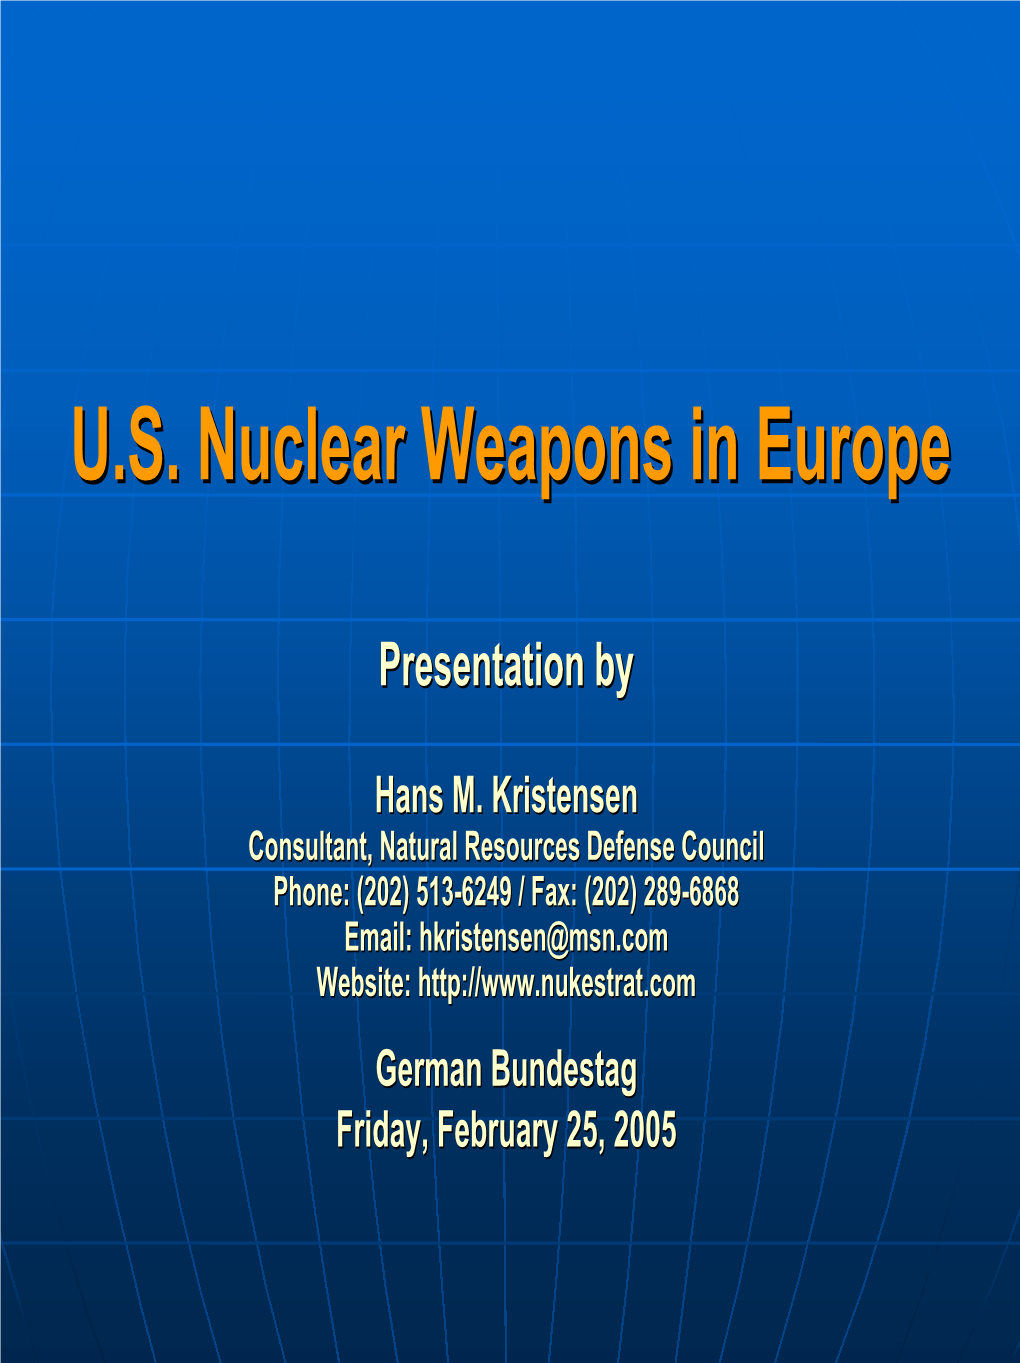 U.S. Nuclear Weapons in Europe - Hans M